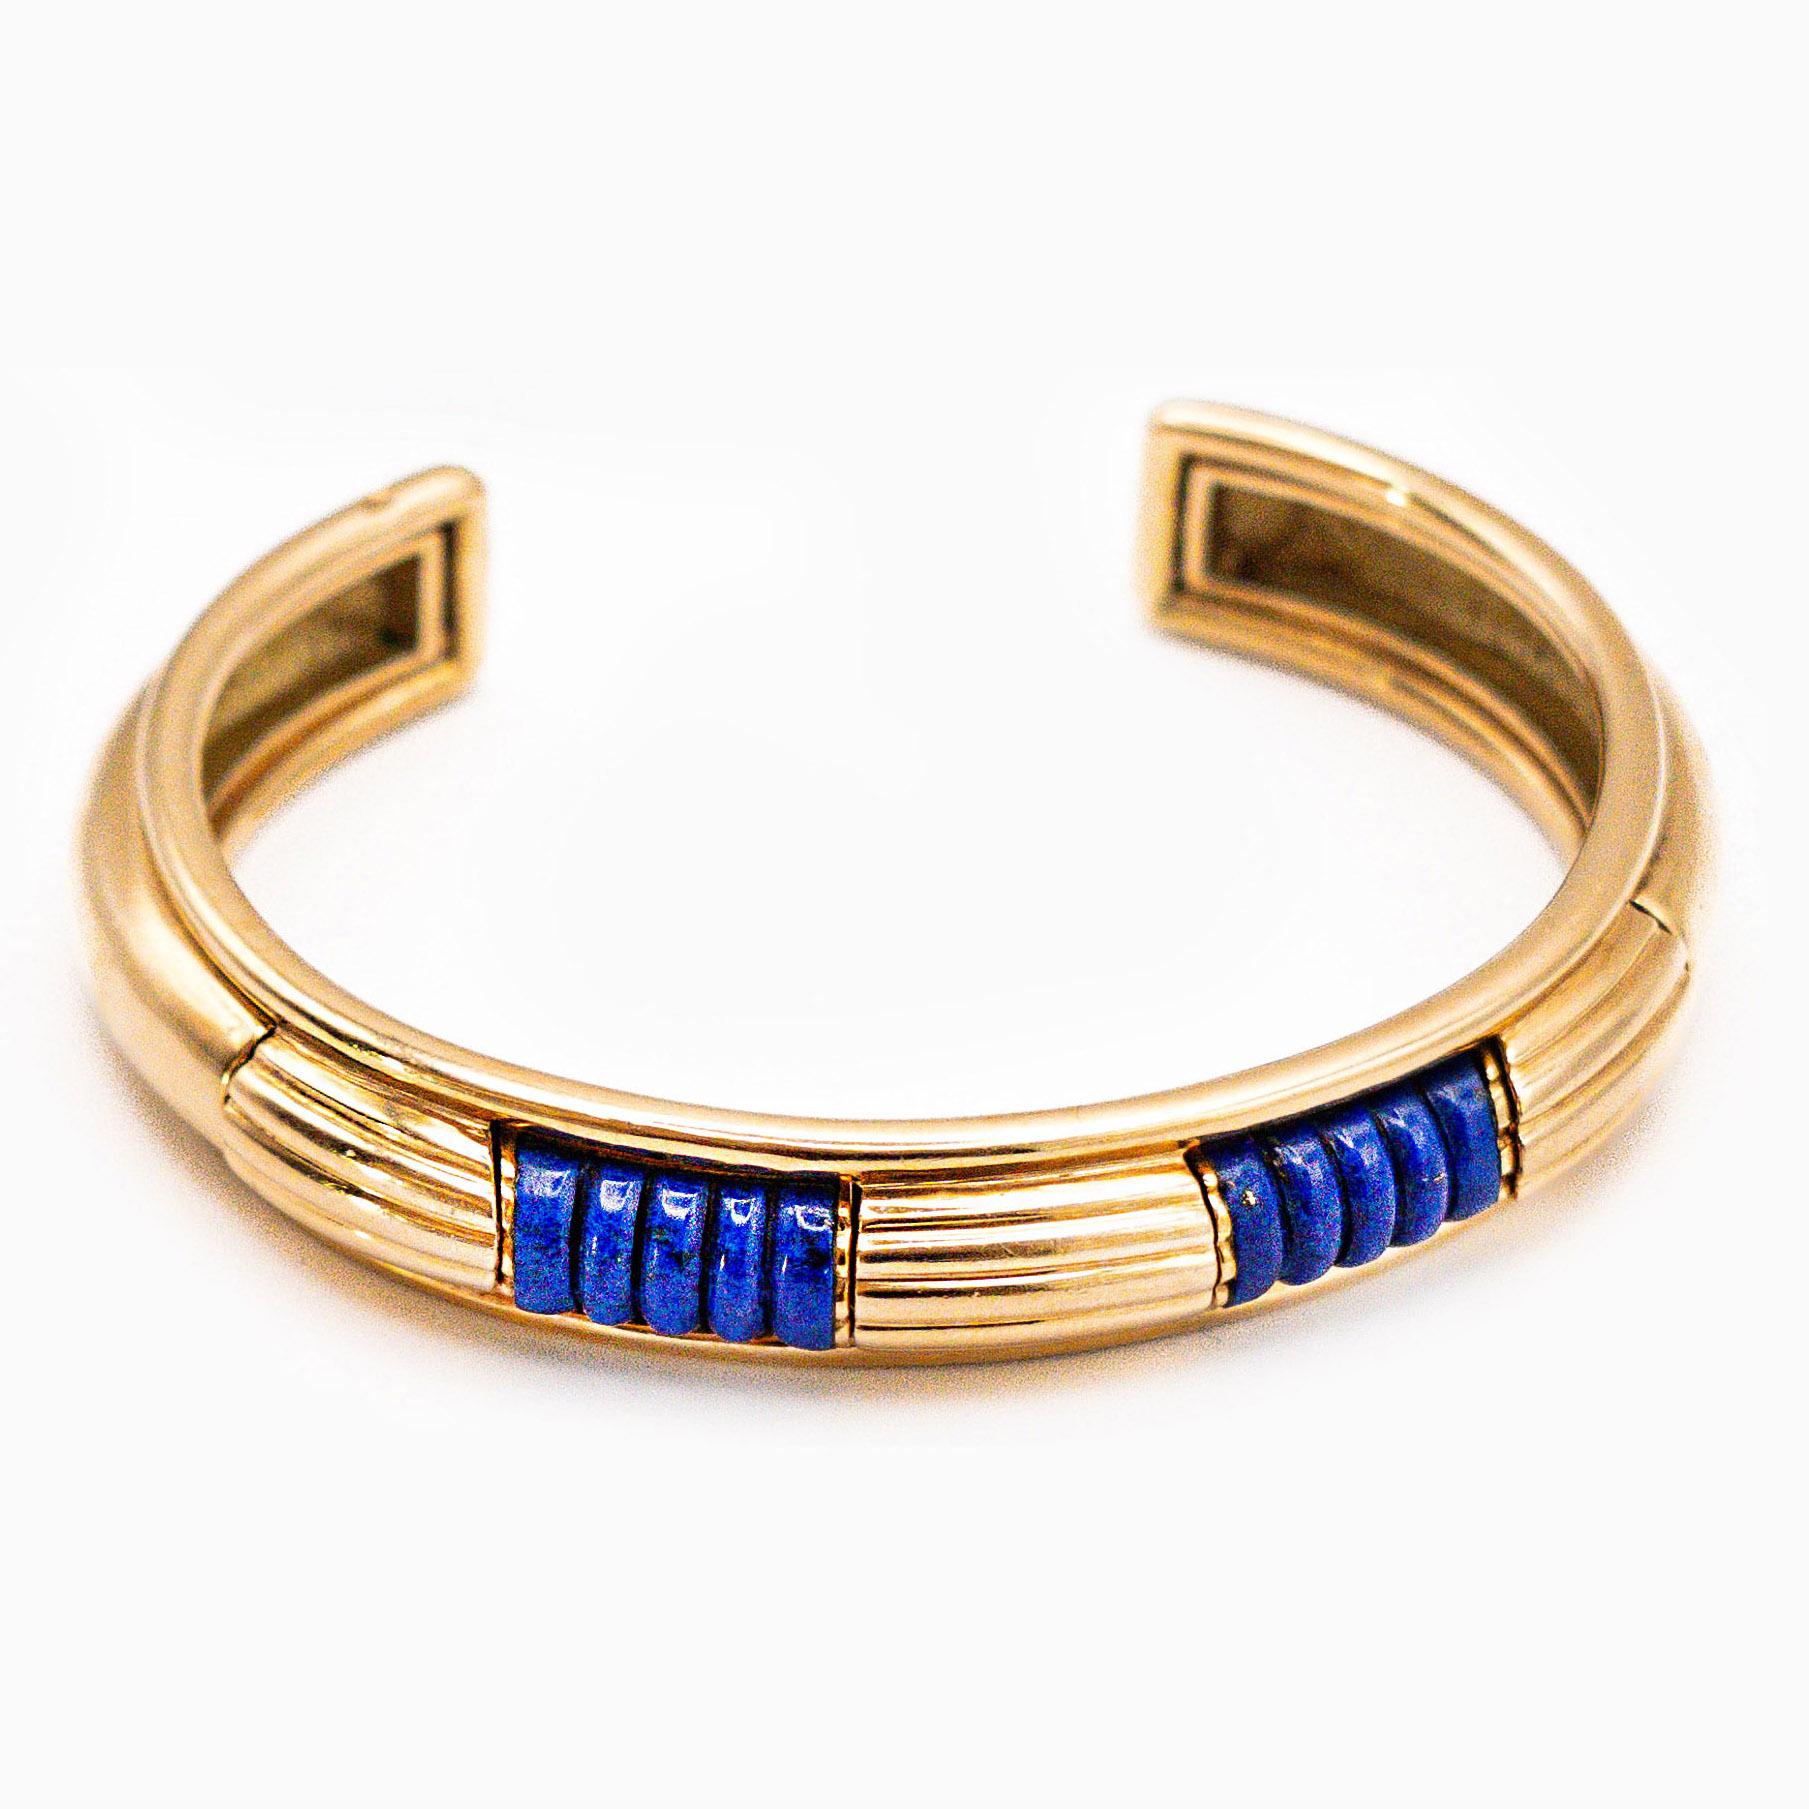 Rigid and open bracelet in yellow gold, the removable center decorated with decorated apis lazuli motifs. Signed and numbered Boucheron.
Diam : 5.9 cm
W : 50 g

In 1893, Frédéric Boucheron was the first of the great contemporary jewelers to open a